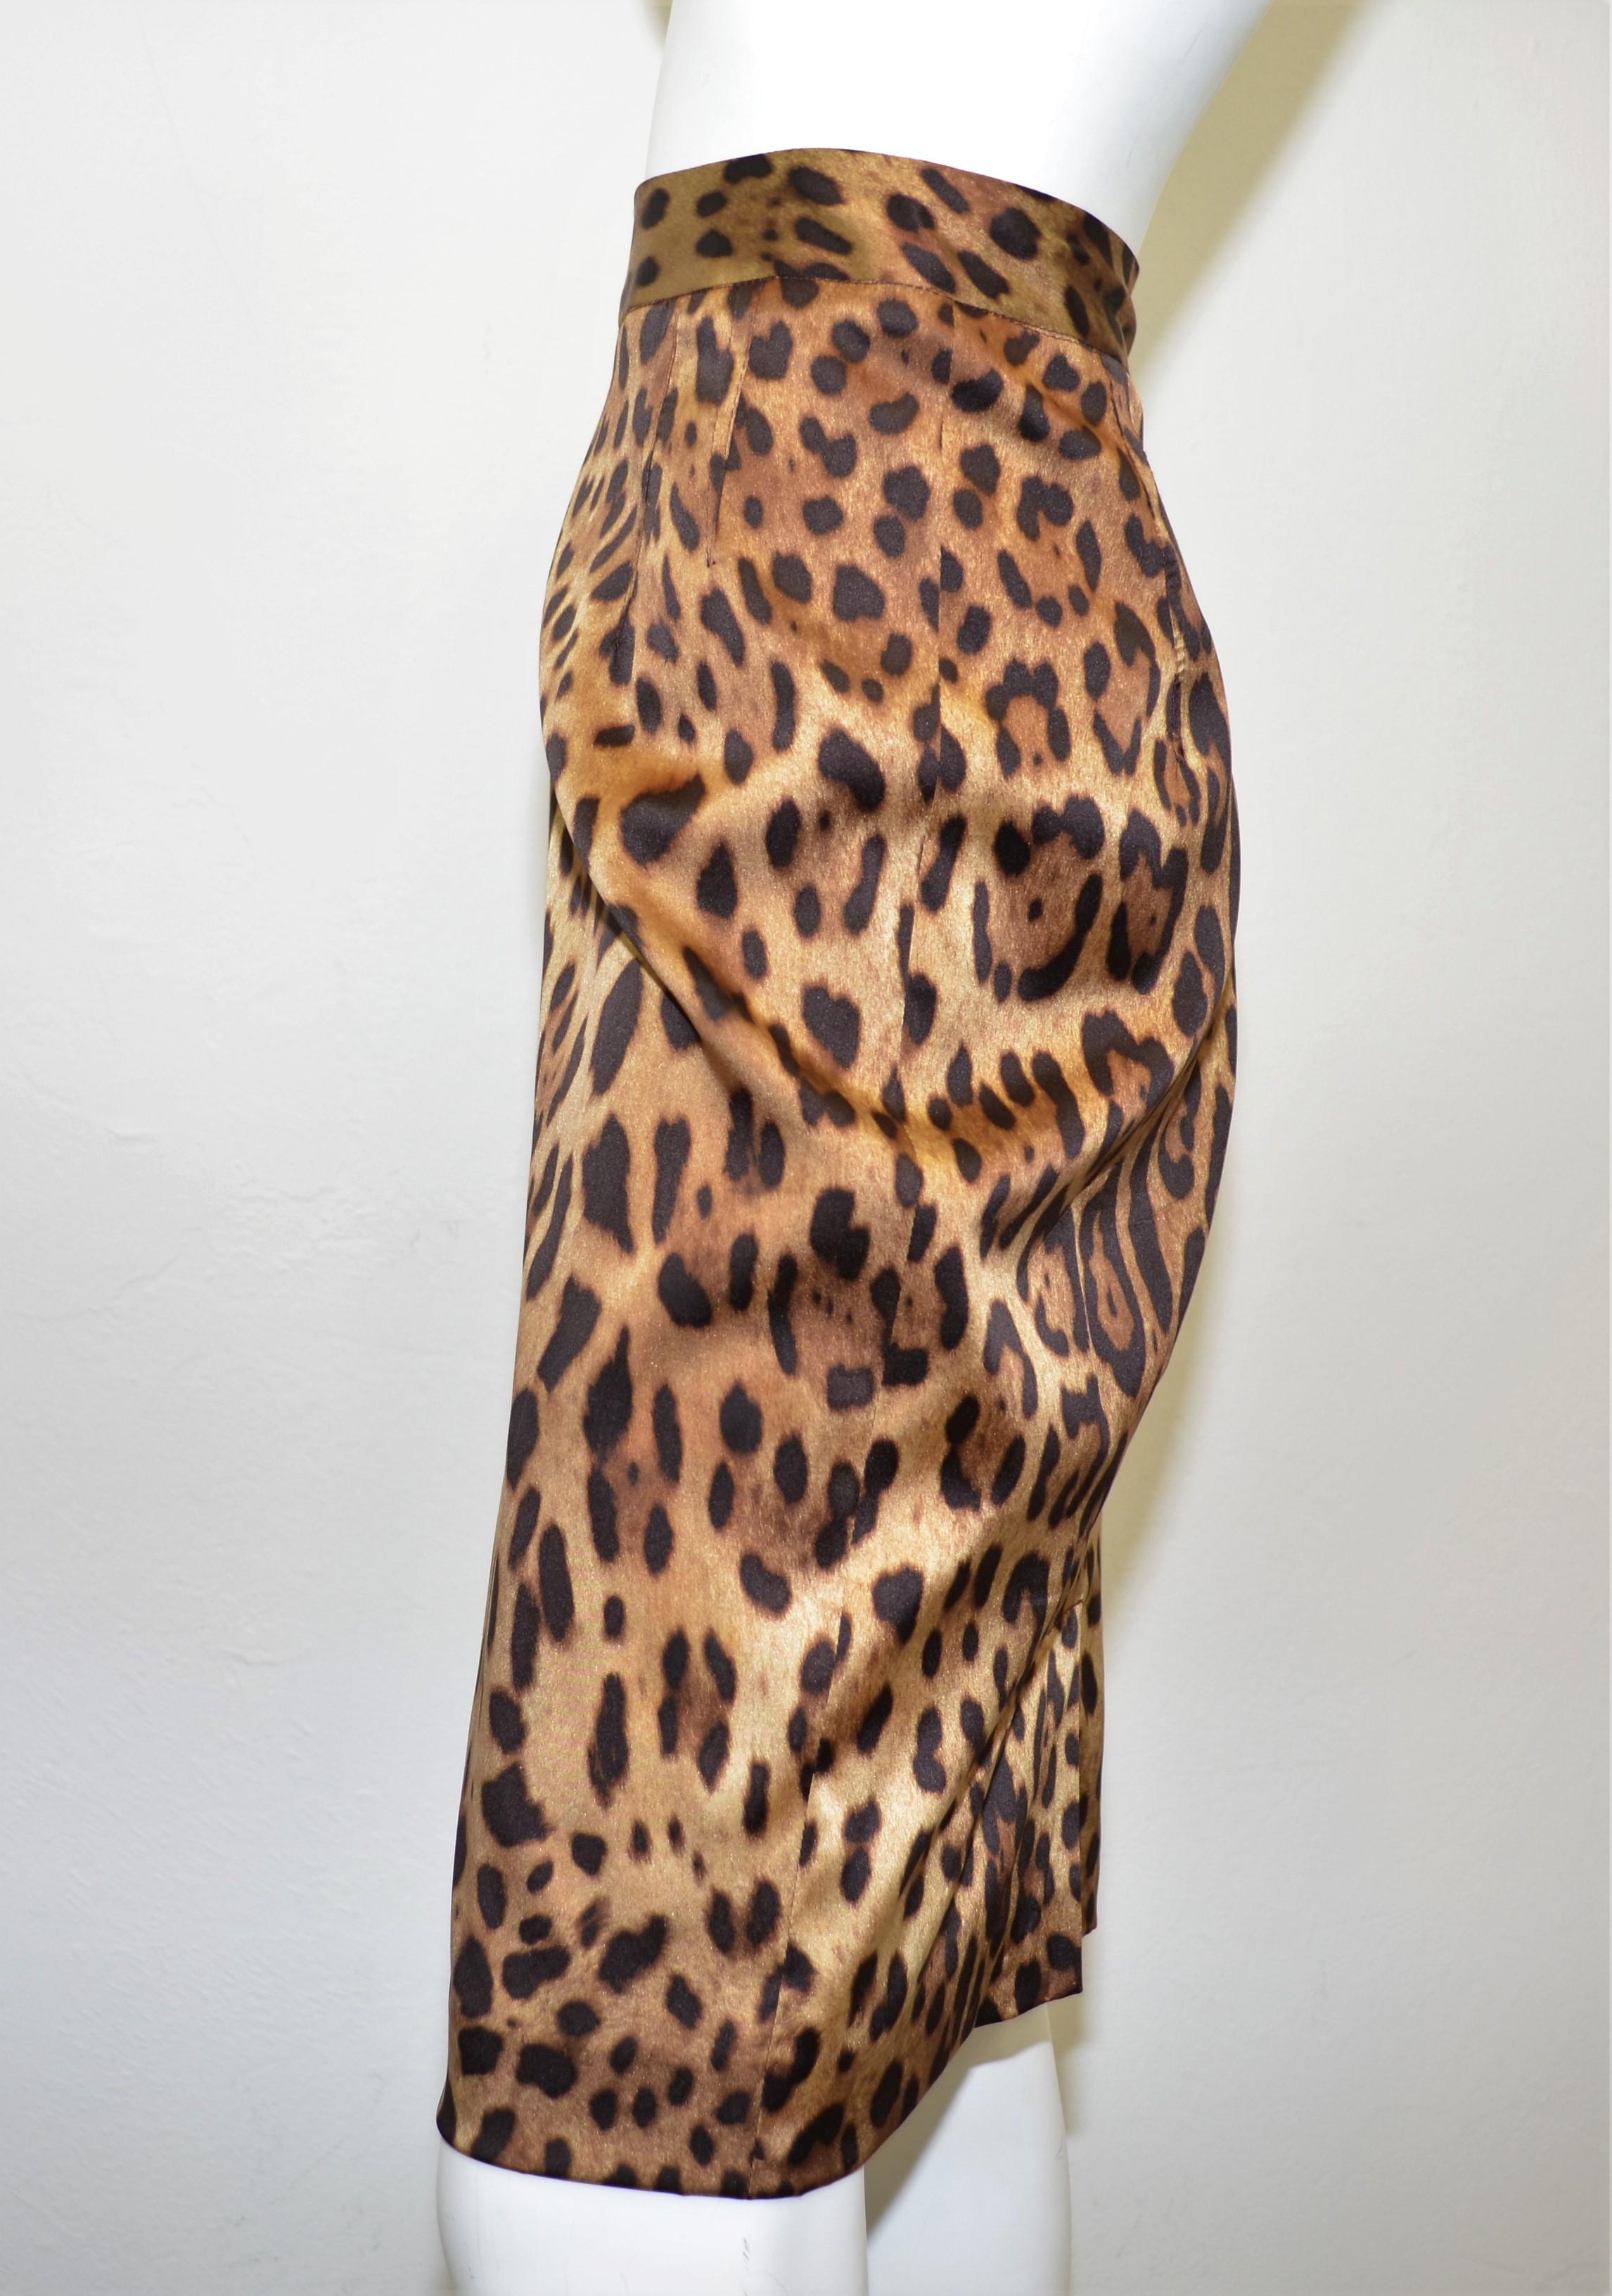 Dolce & Gabbana leopard print pencil skirt in a silk satin fabric with a back zipper fastening. Skirt is a size 42, made in Italy.

Waist 28''
Hips 34''
Length 24''